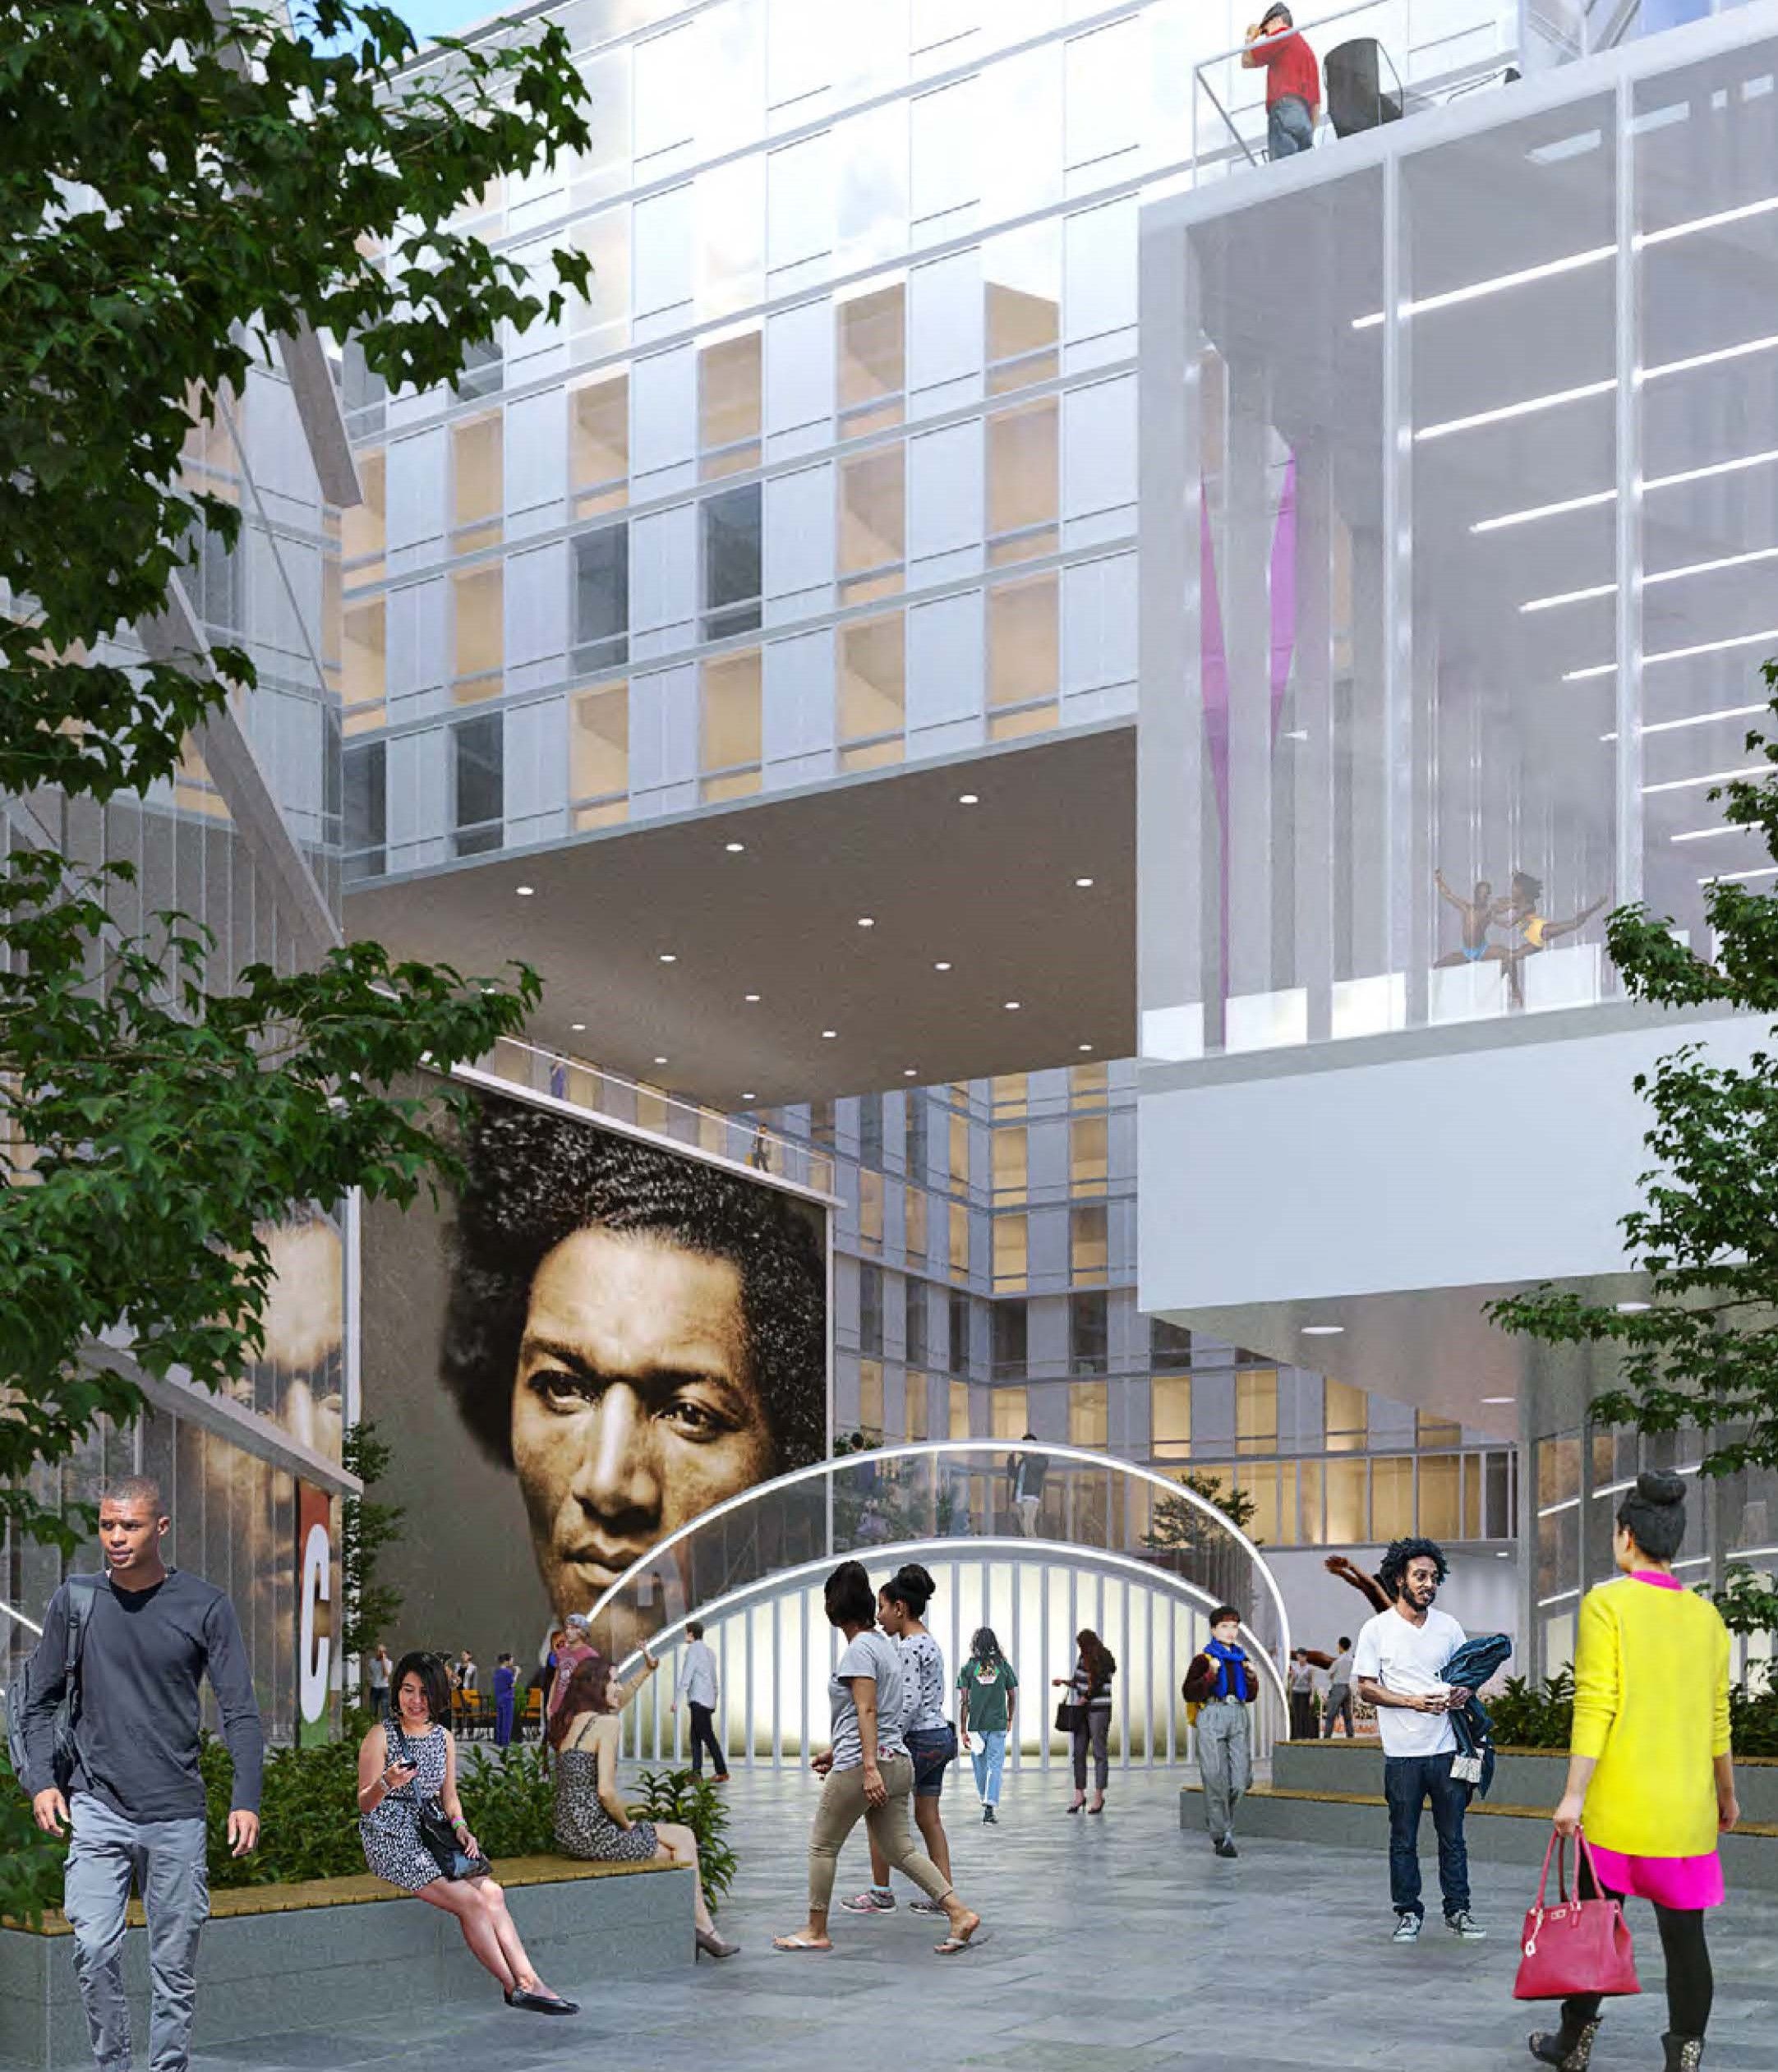 A rendering of the proposed building with a mural of Frederick Douglass